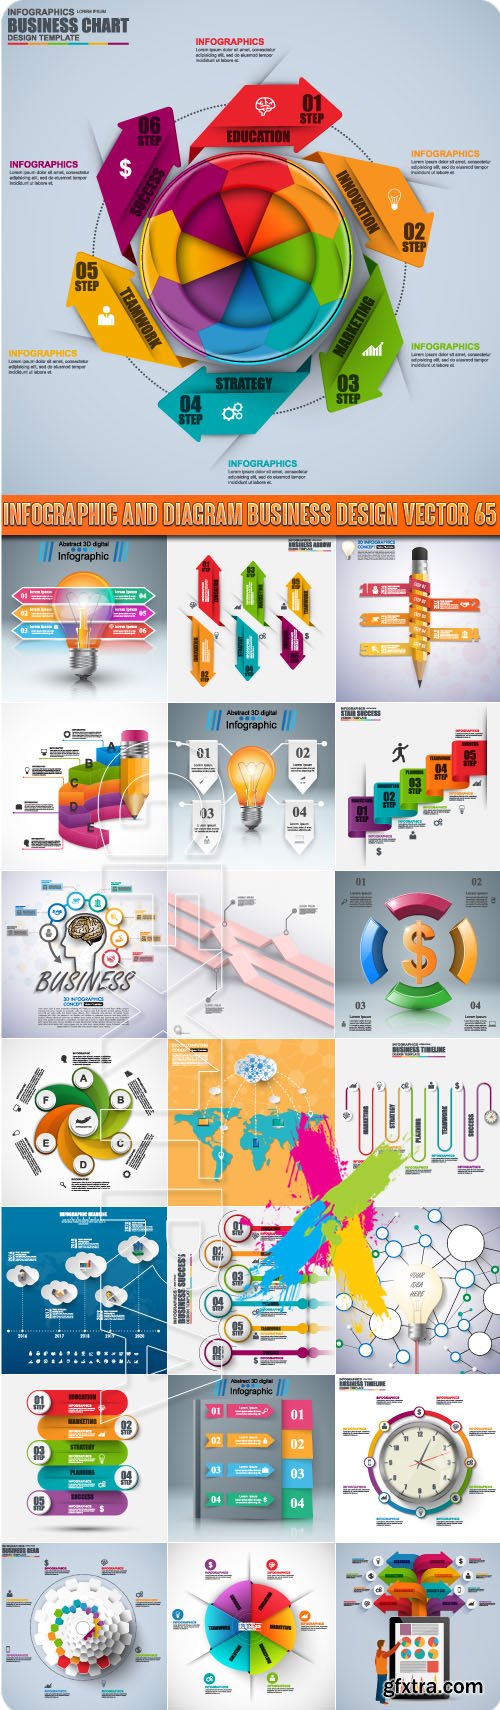 Infographic and diagram business design vector 65